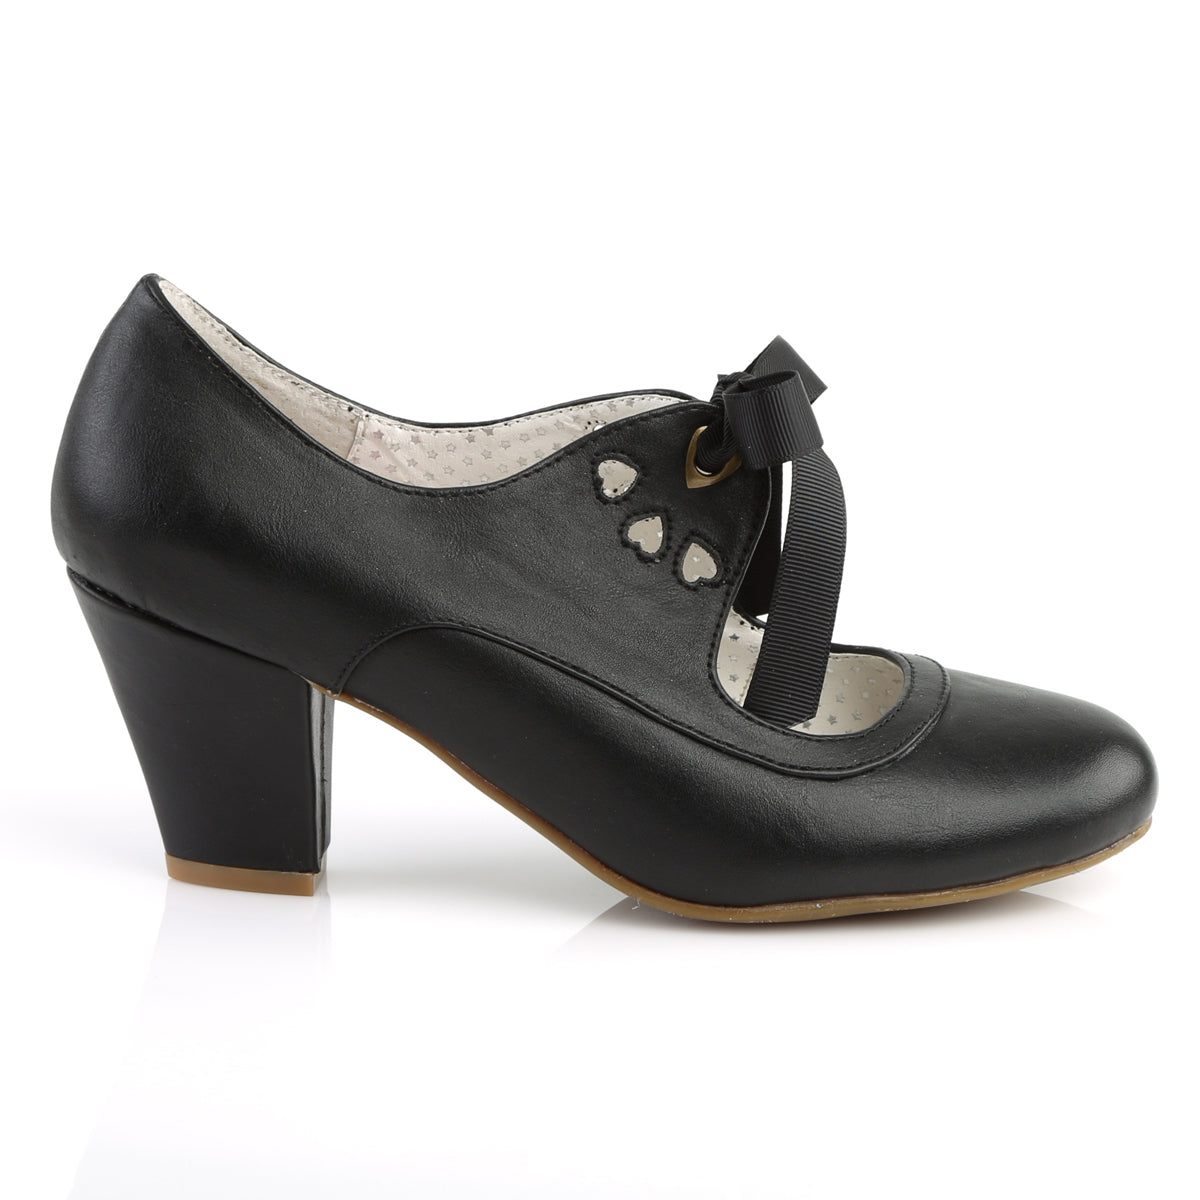 WIGGLE-32 Pin Up Couture Black Faux Leather Single Soles [Sexy Shoes]